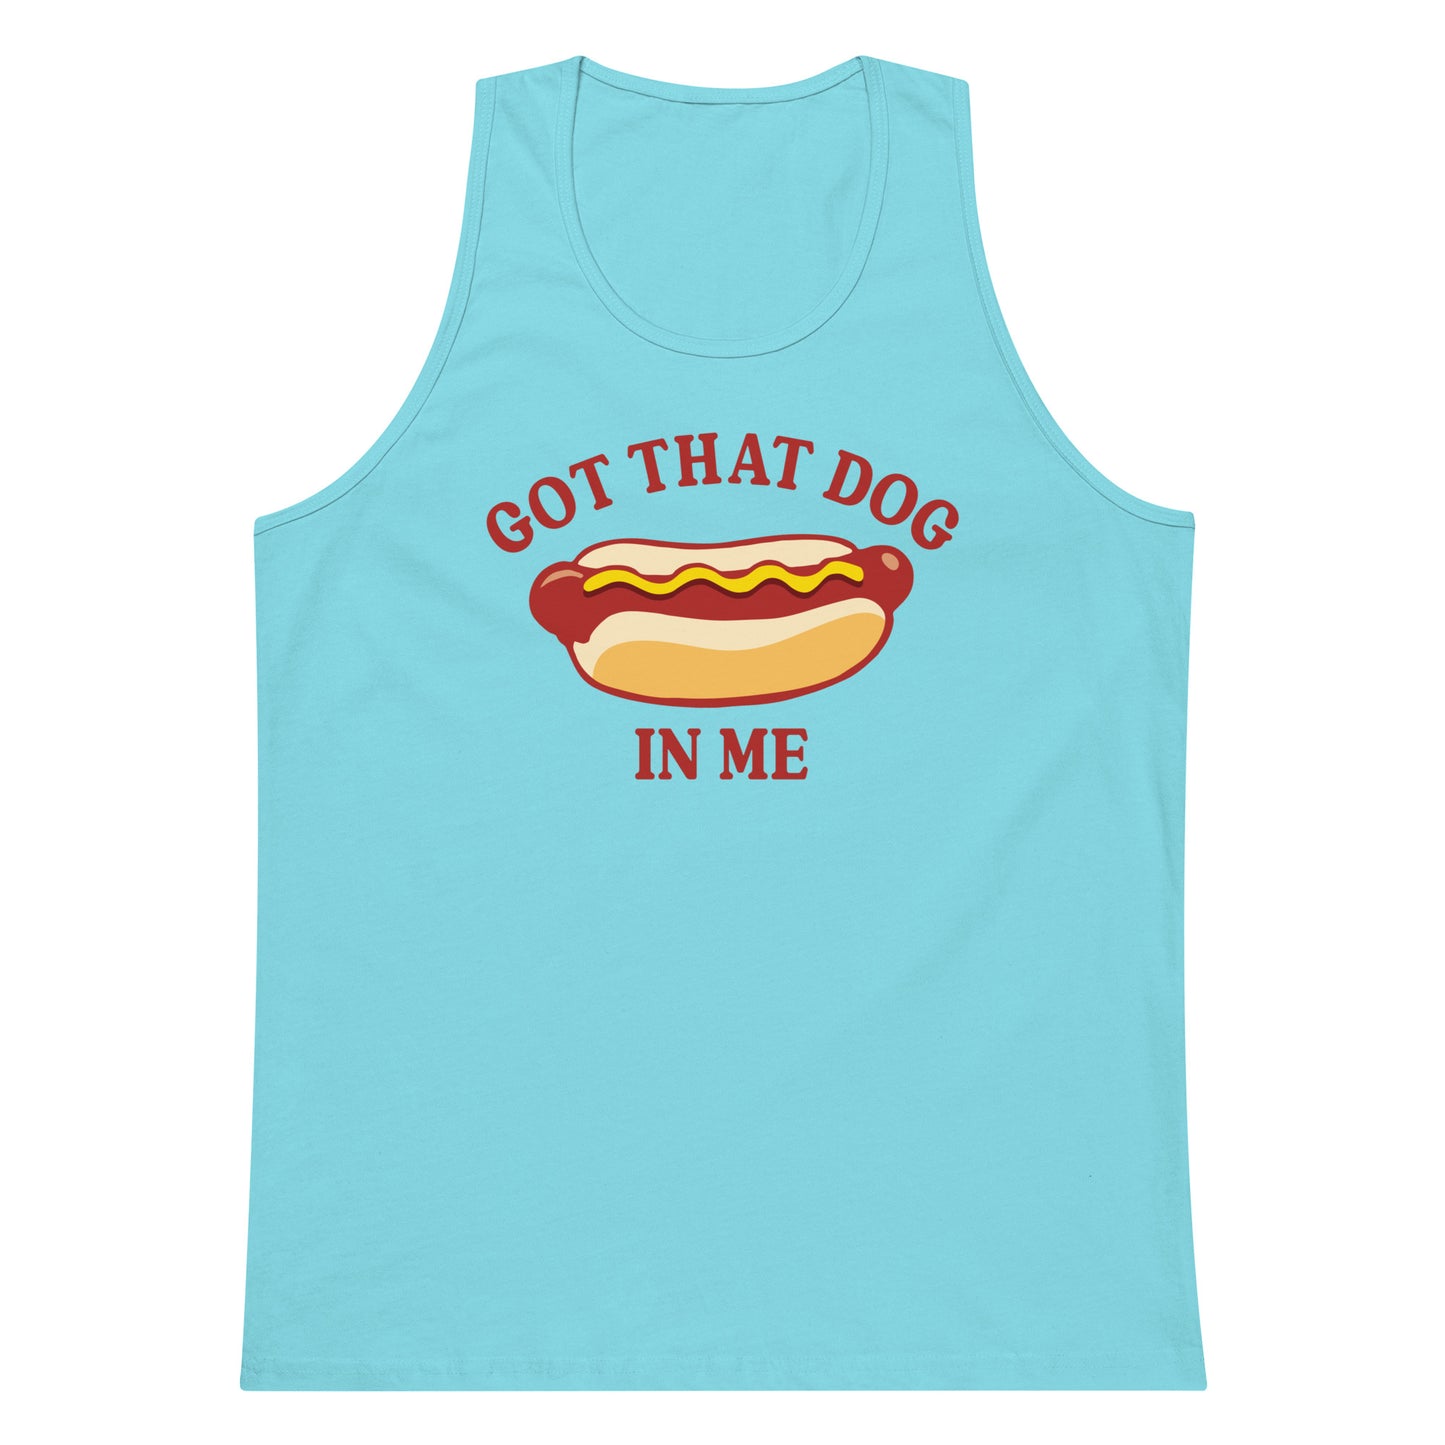 Got That Dog in Me (Hot Dog) tank top